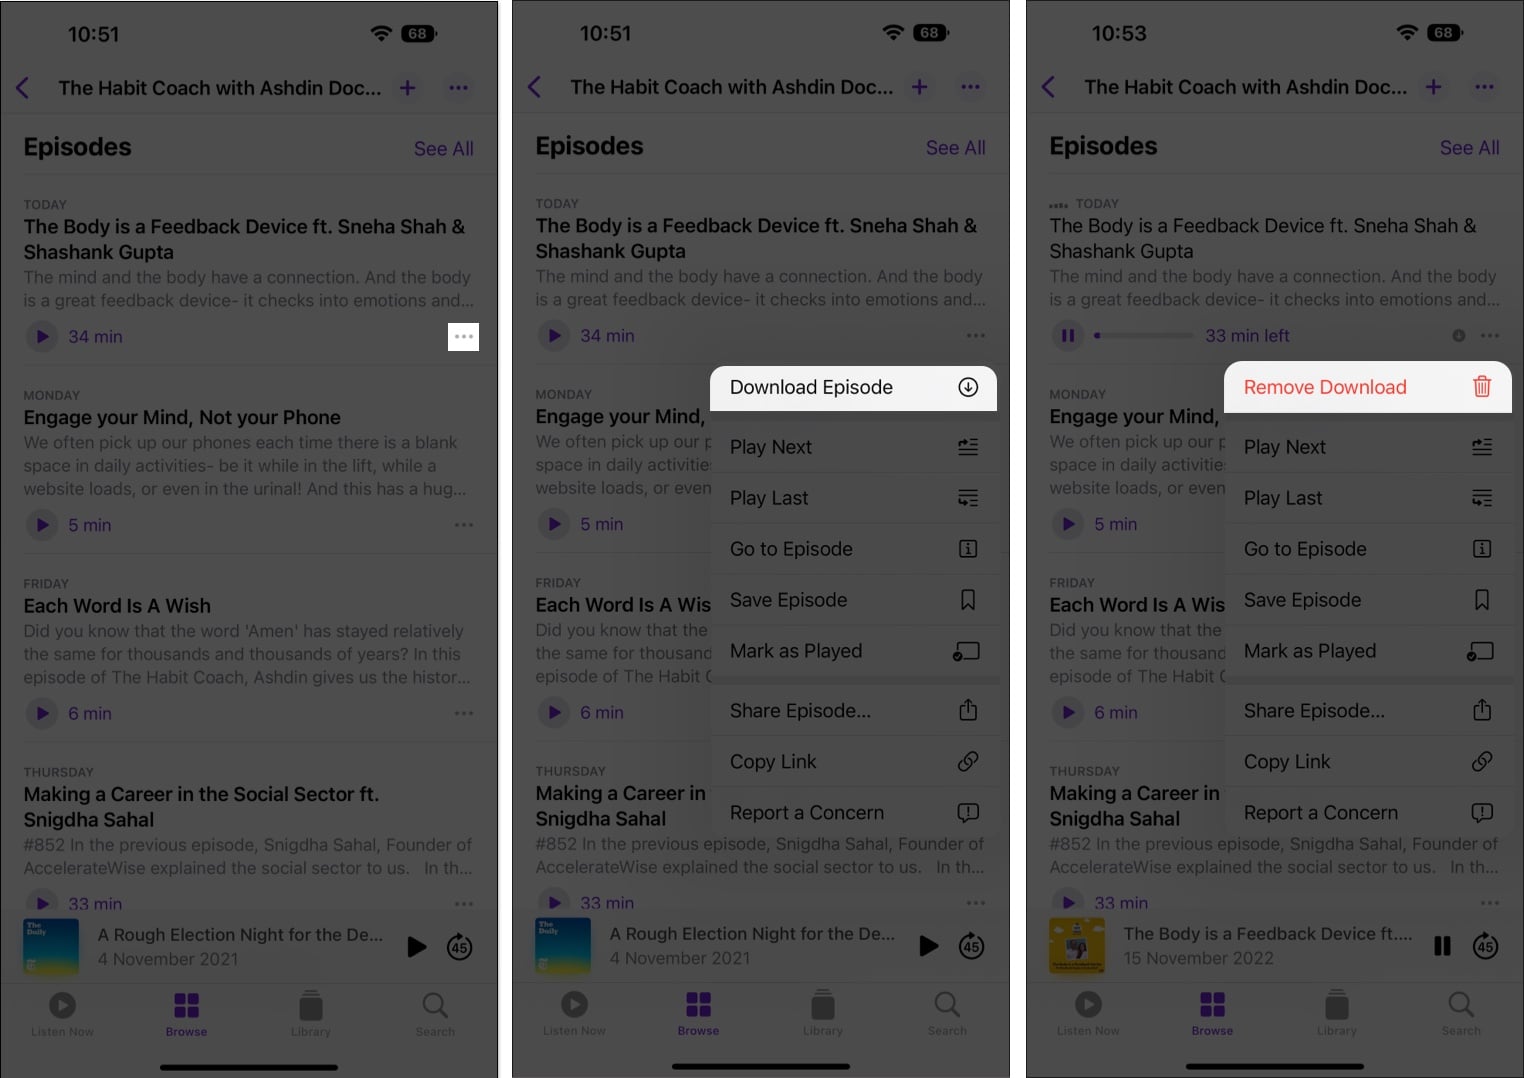 How to download or remove podcast episodes from iPhone 